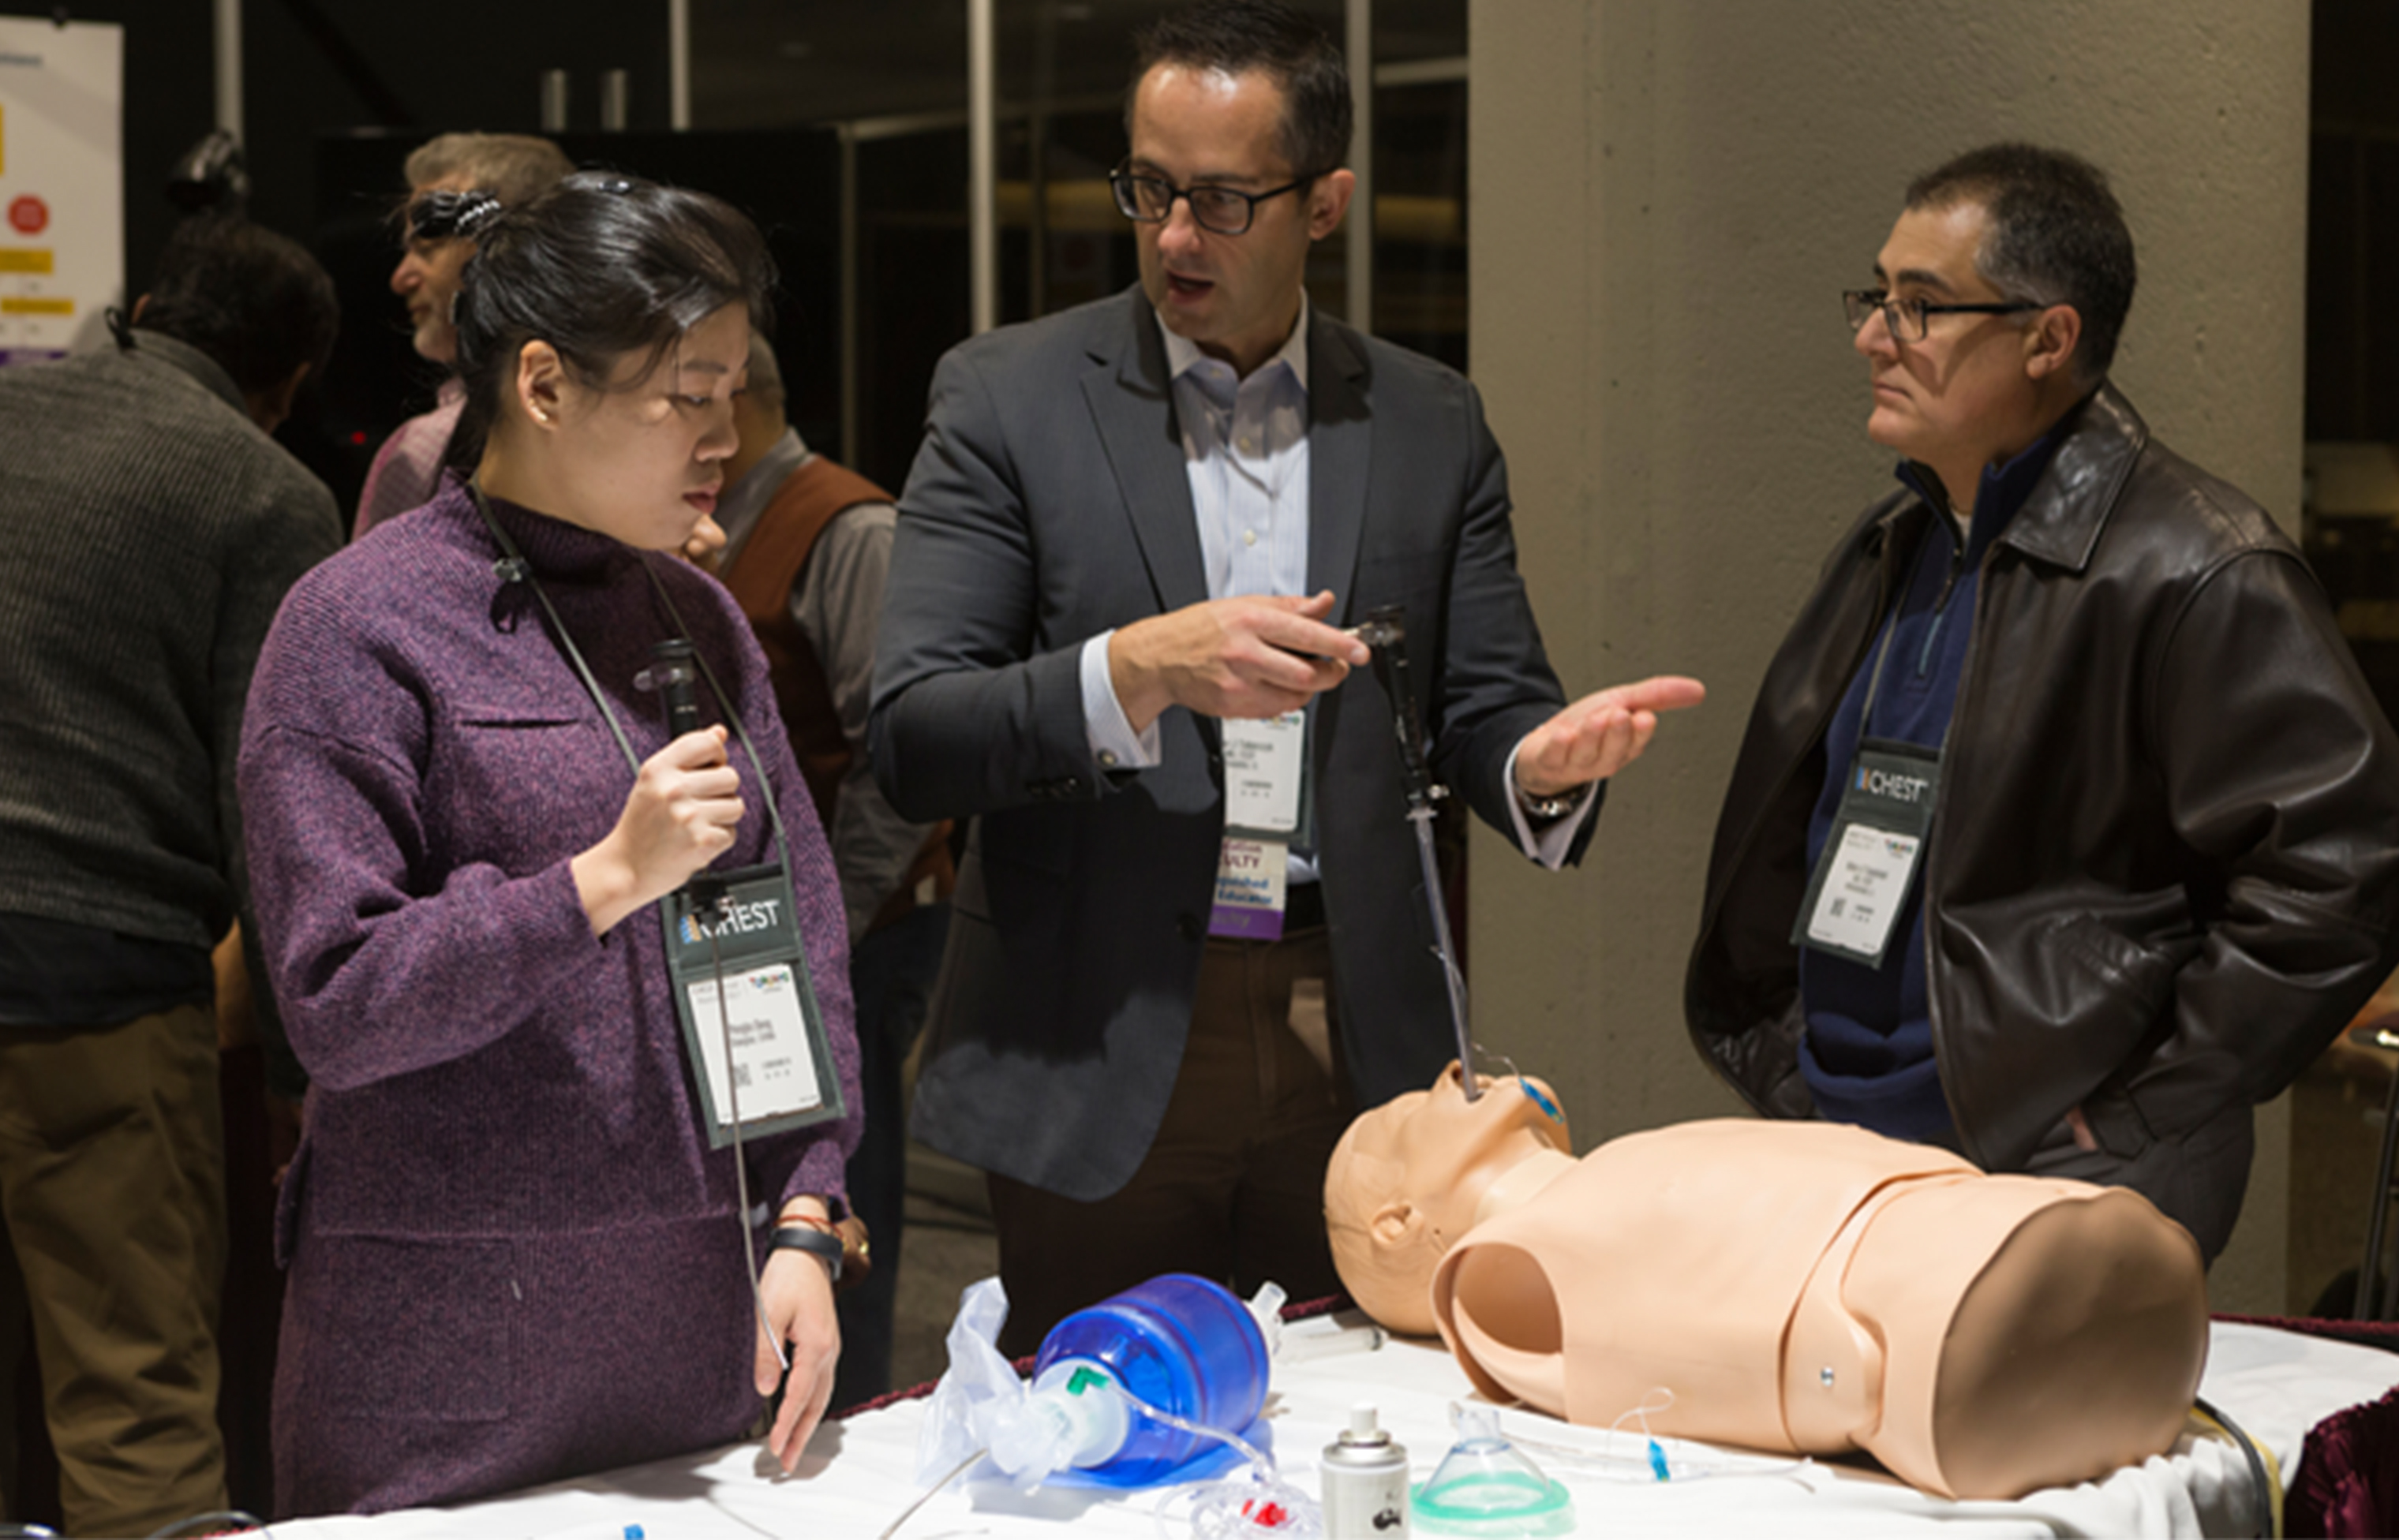 CHEST 2018 features ‘Learn by Doing’ program, focuses on hands-on experiences